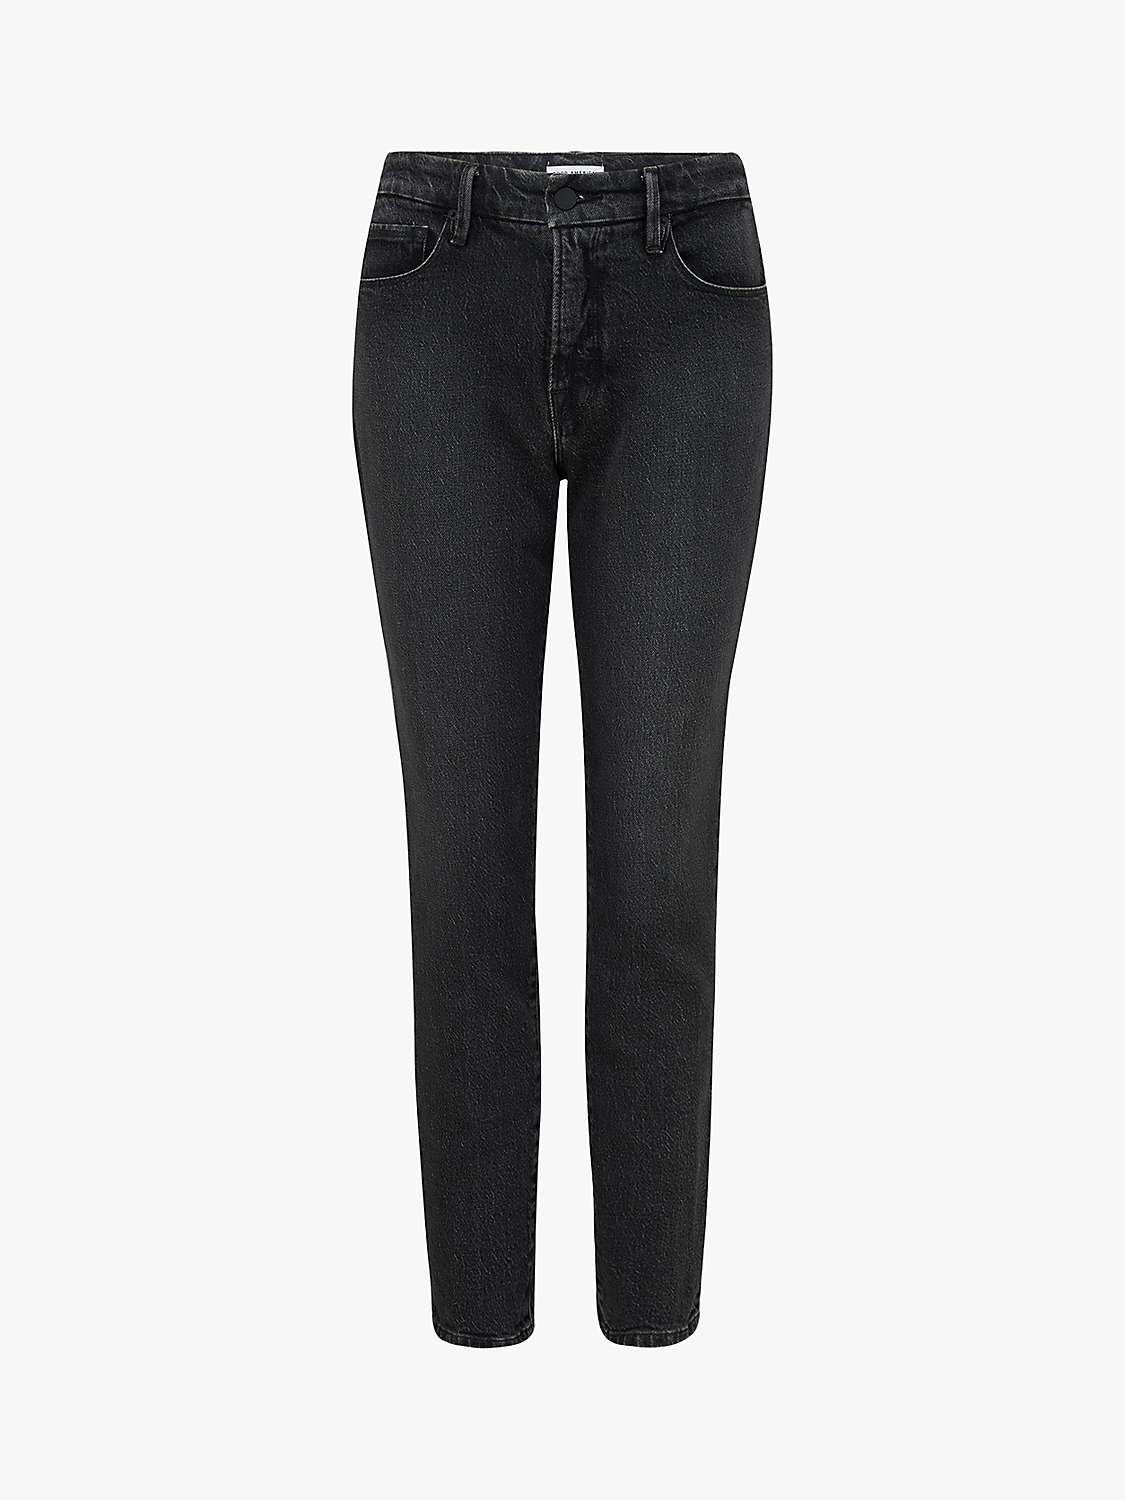 Buy Good American Classic Straight Cut Jeans, Black Online at johnlewis.com